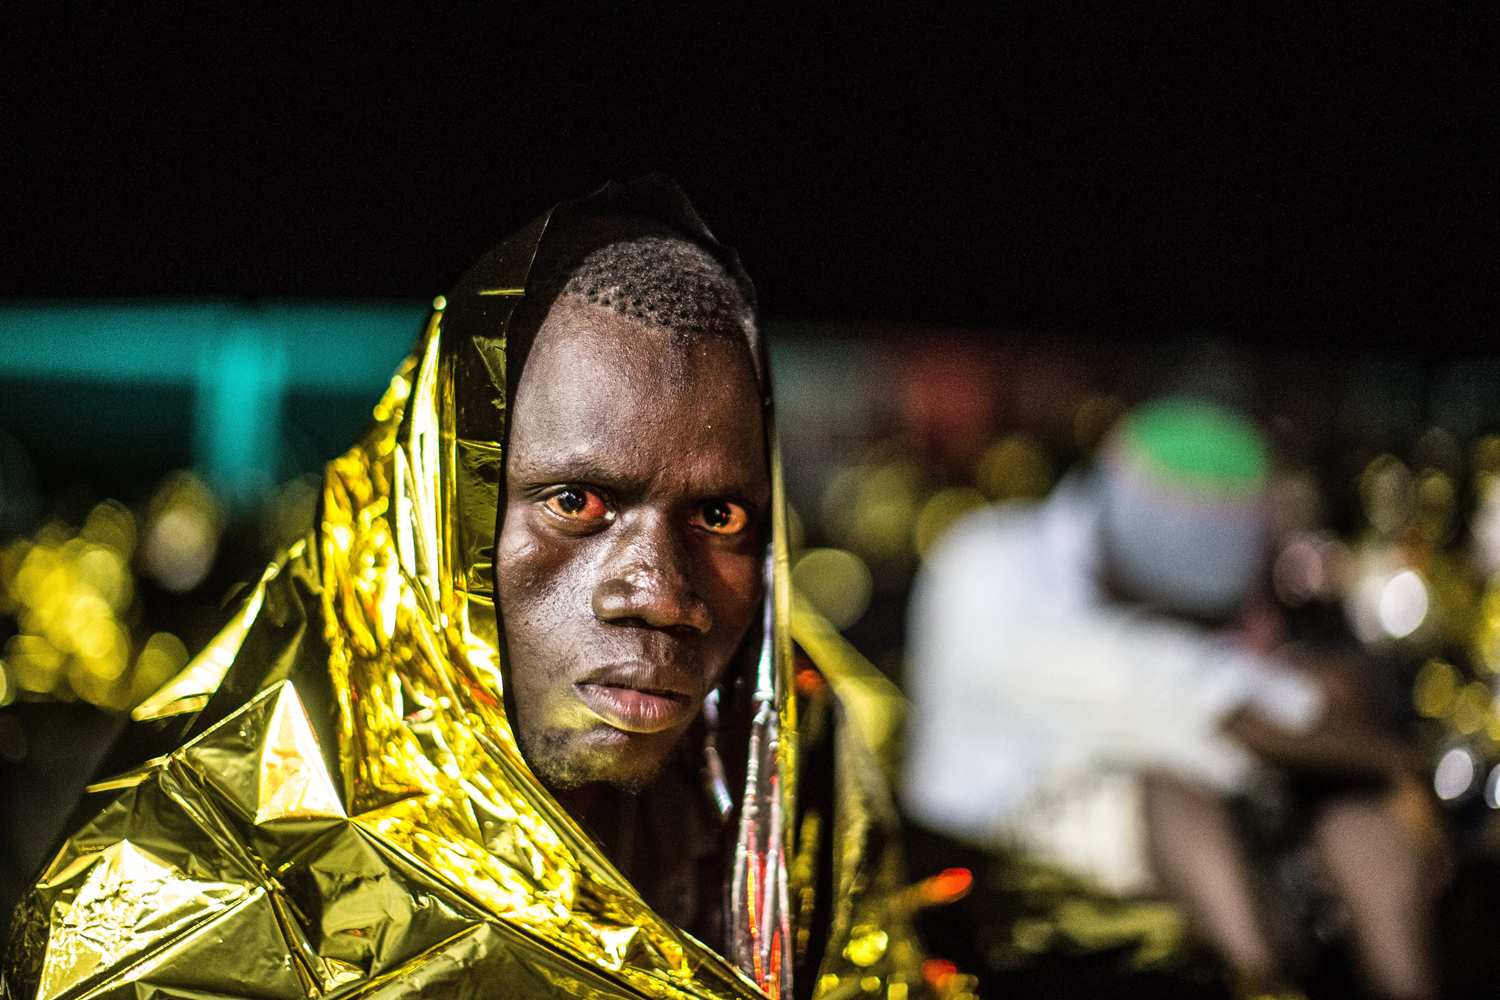 Africa refugees on an Italian navy ship after being rescued at sea, June 8, 2014. (Massimo Sestini—Polaris)